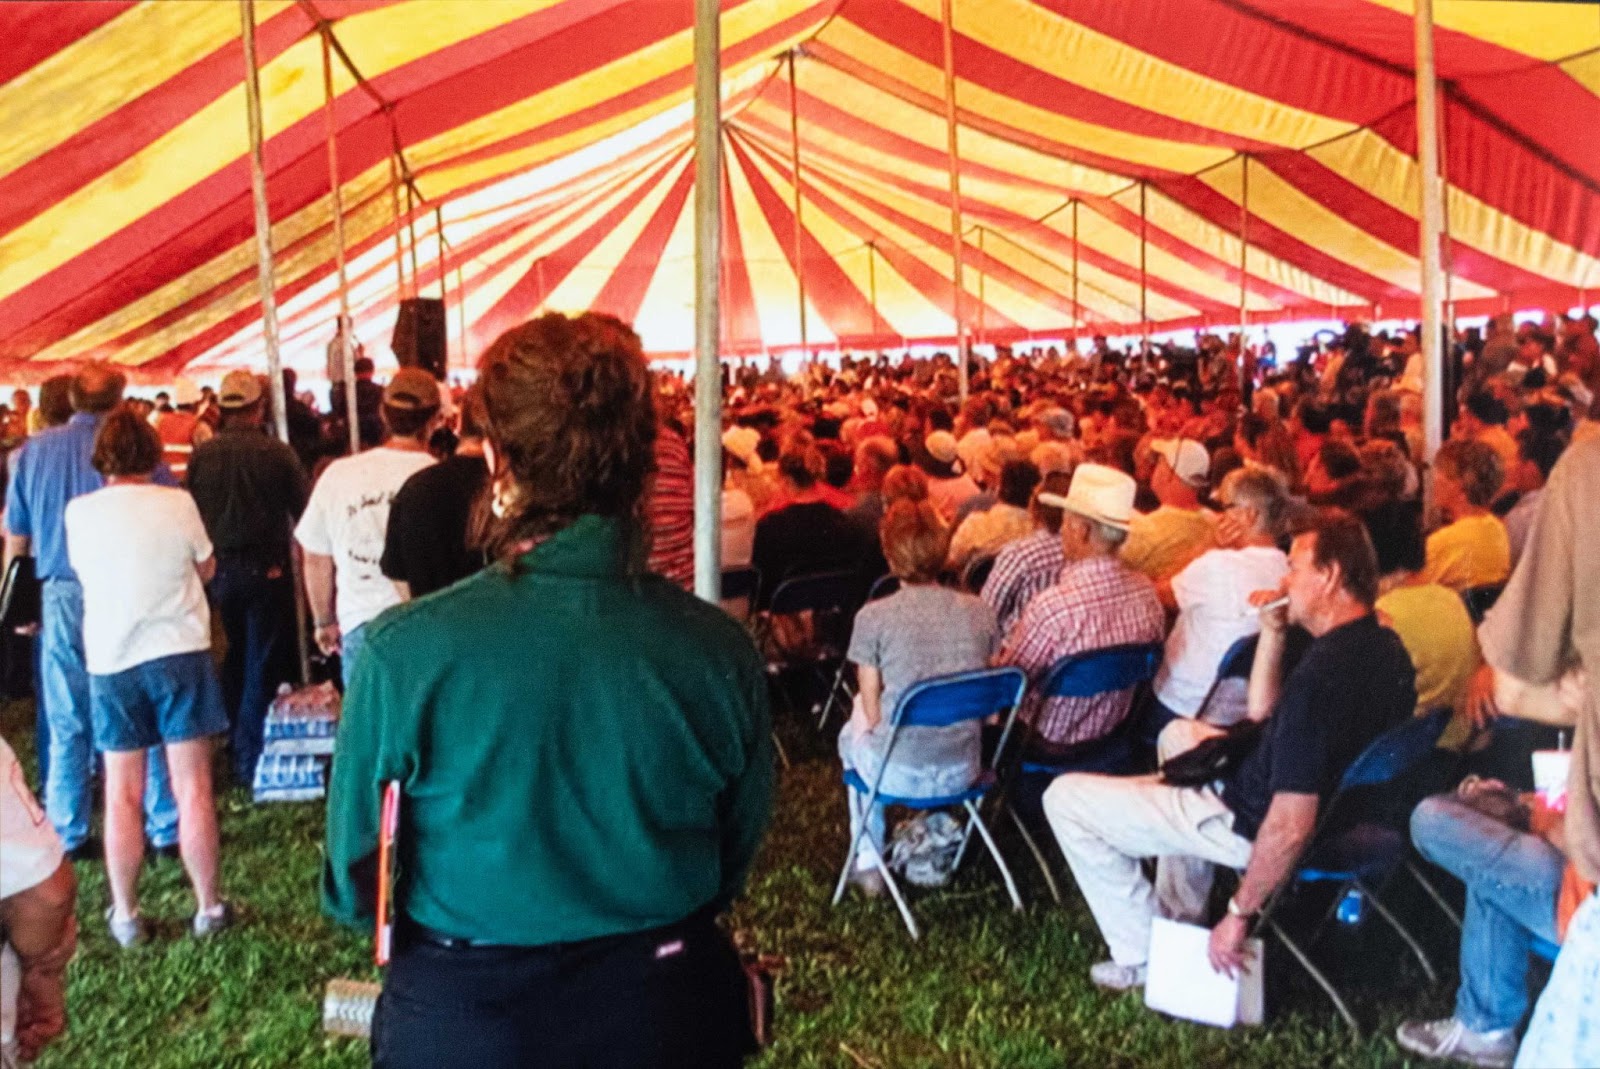 Photo of a crowd of people meeting under a white-and-red-striped tent 